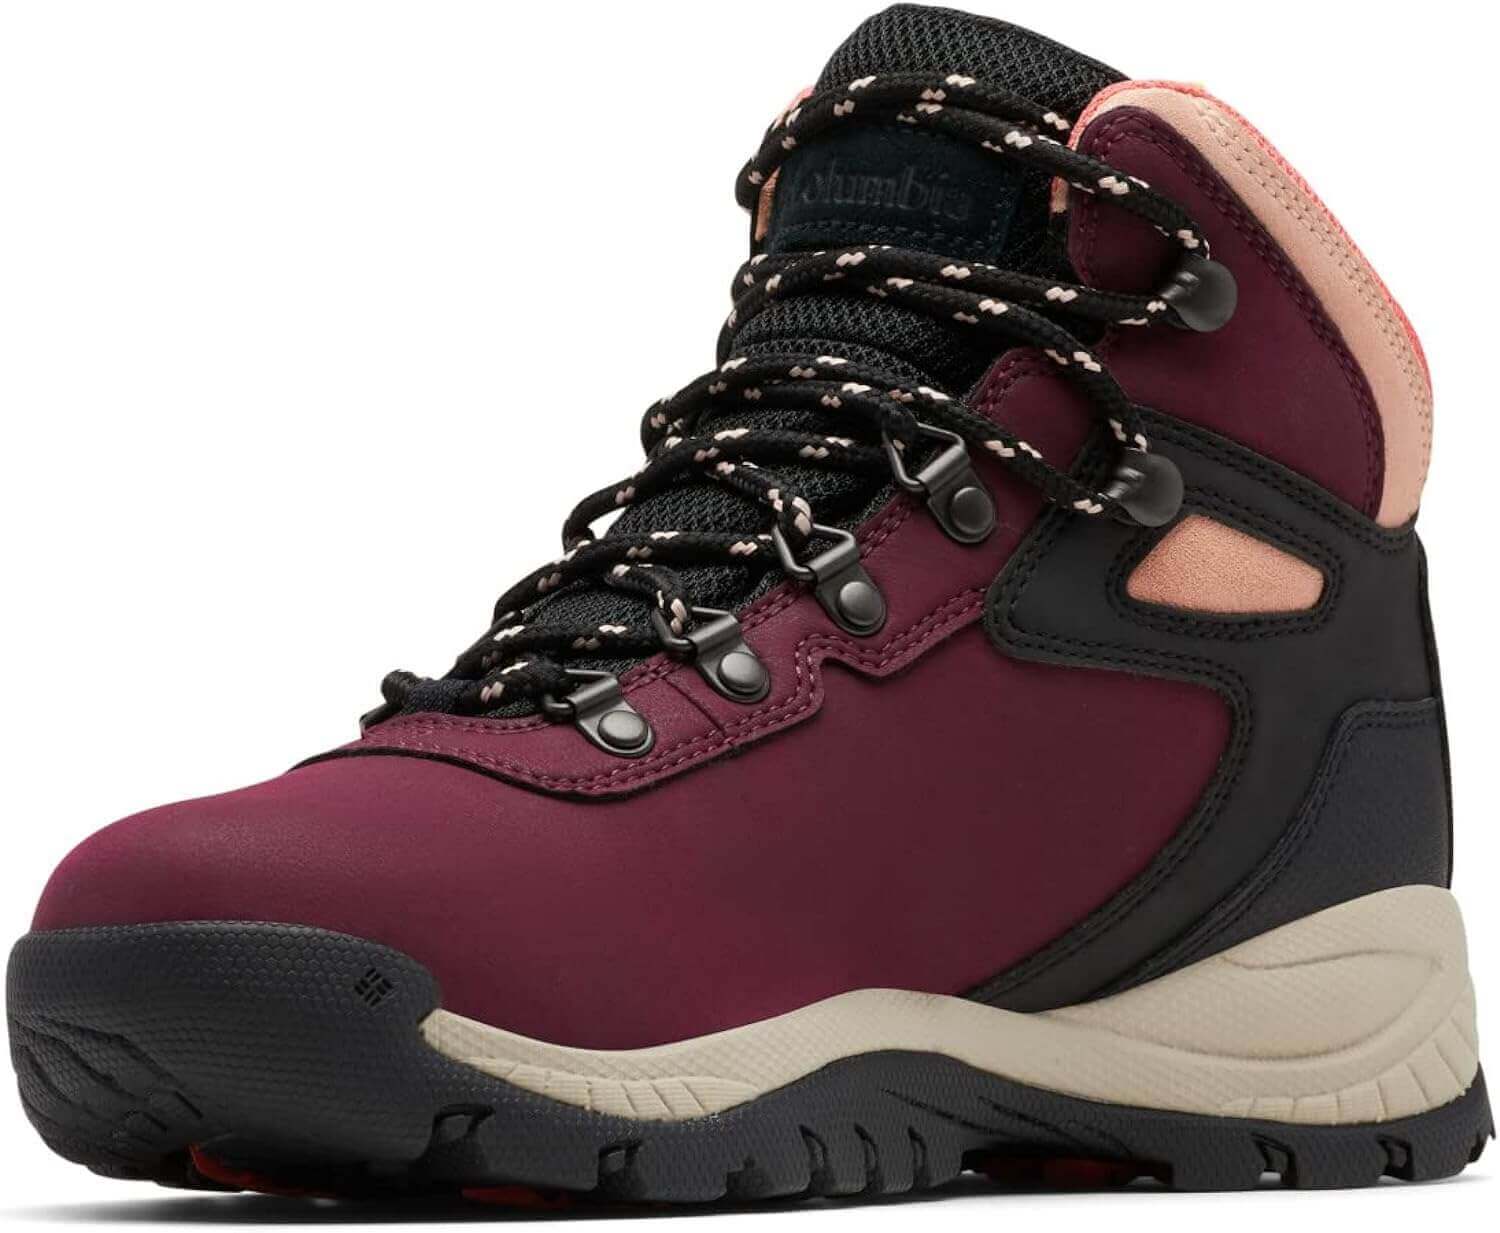 Shop The Latest >Columbia Women's Newton Ridge Waterproof Hiking Boot > *Only $122.47*> From The Top Brand > *Columbial* > Shop Now and Get Free Shipping On Orders Over $45.00 >*Shop Earth Foot*